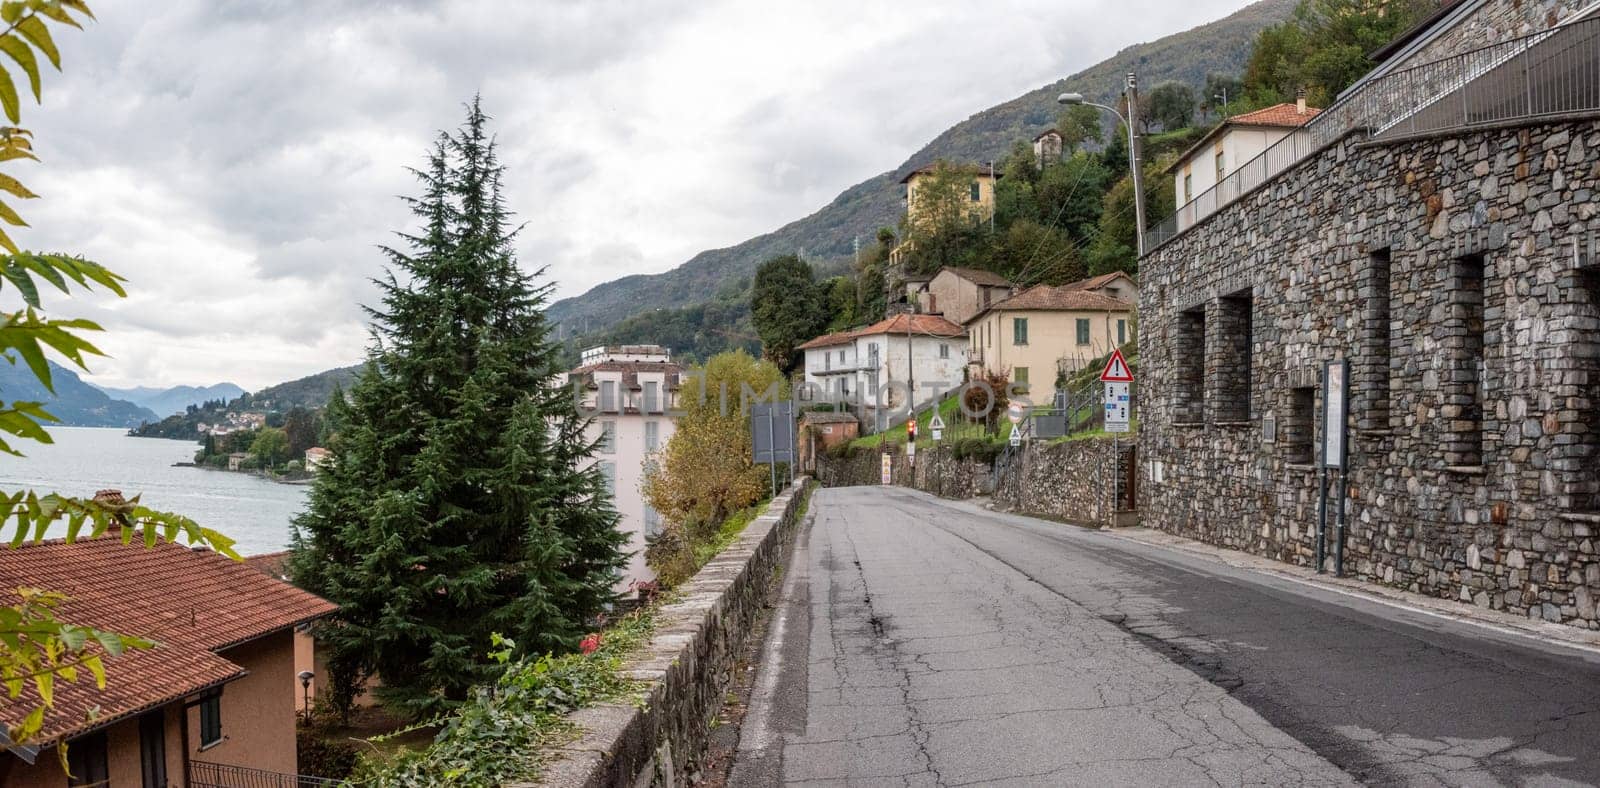 Street in village Musso-Dongo at lake Como, where the dictator Mussolini became imprisoned through a road blockade by imagoDens